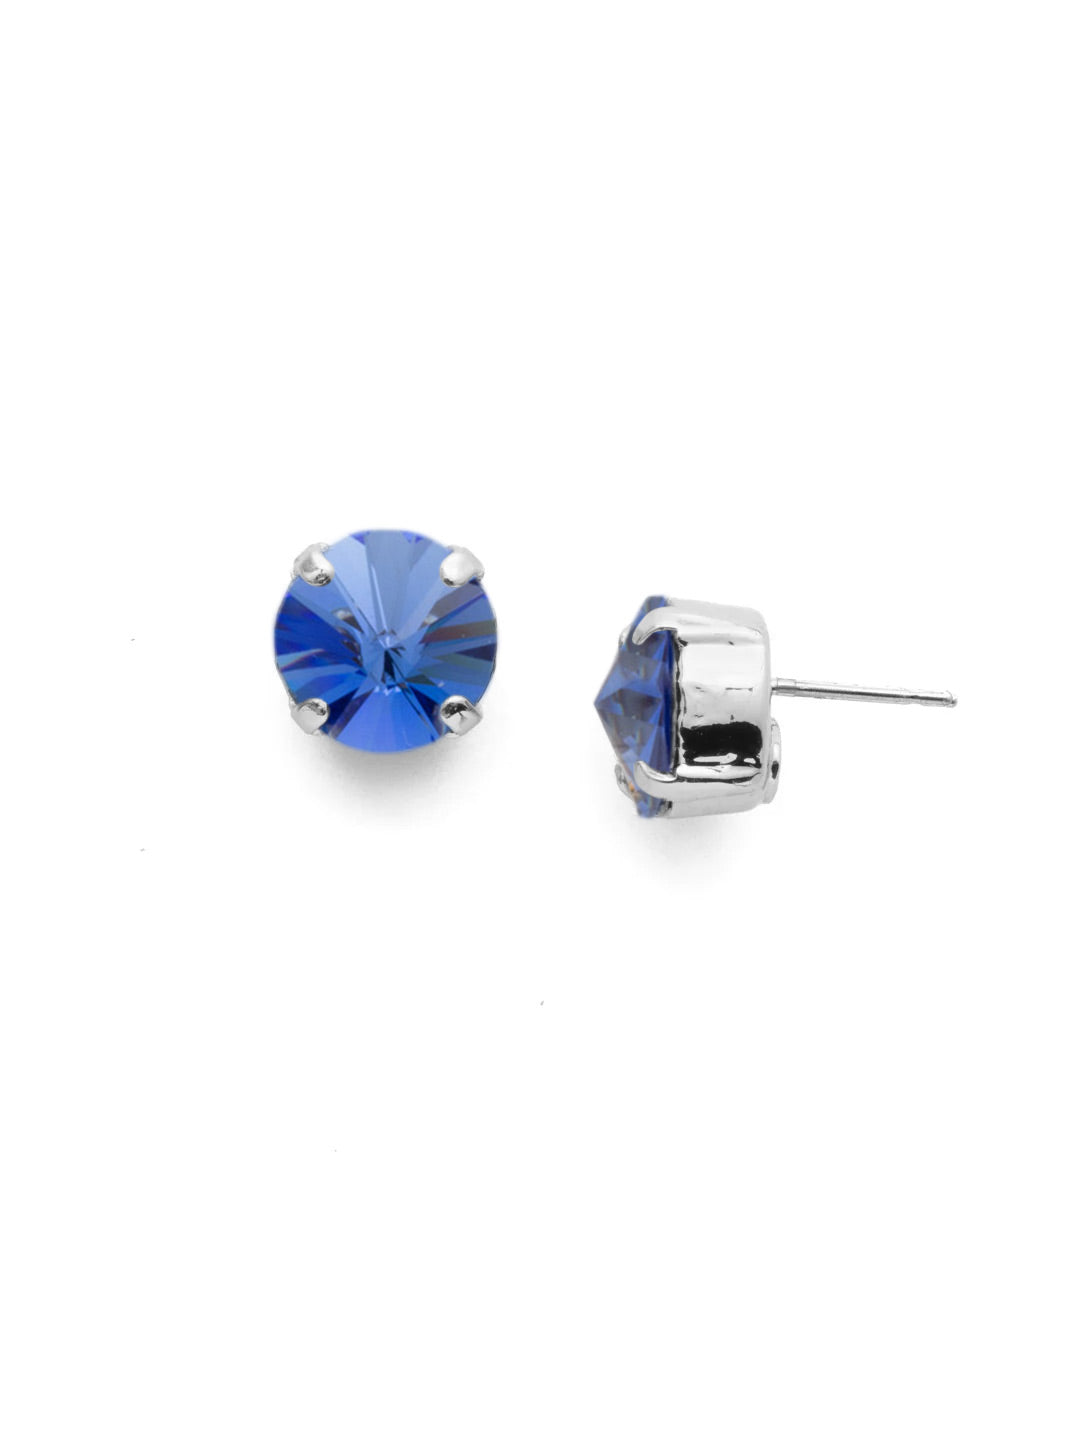 London Stud Earrings - ECM14PDSAP - <p>Everyone needs a great pair of studs. Add some classic sparkle to any occasion with these stud earrings. Need help picking a stud? <a href="https://www.sorrelli.com/blogs/sisterhood/round-stud-earrings-101-a-rundown-of-sizes-styles-and-sparkle">Check out our size guide!</a> From Sorrelli's Sapphire collection in our Palladium finish.</p>